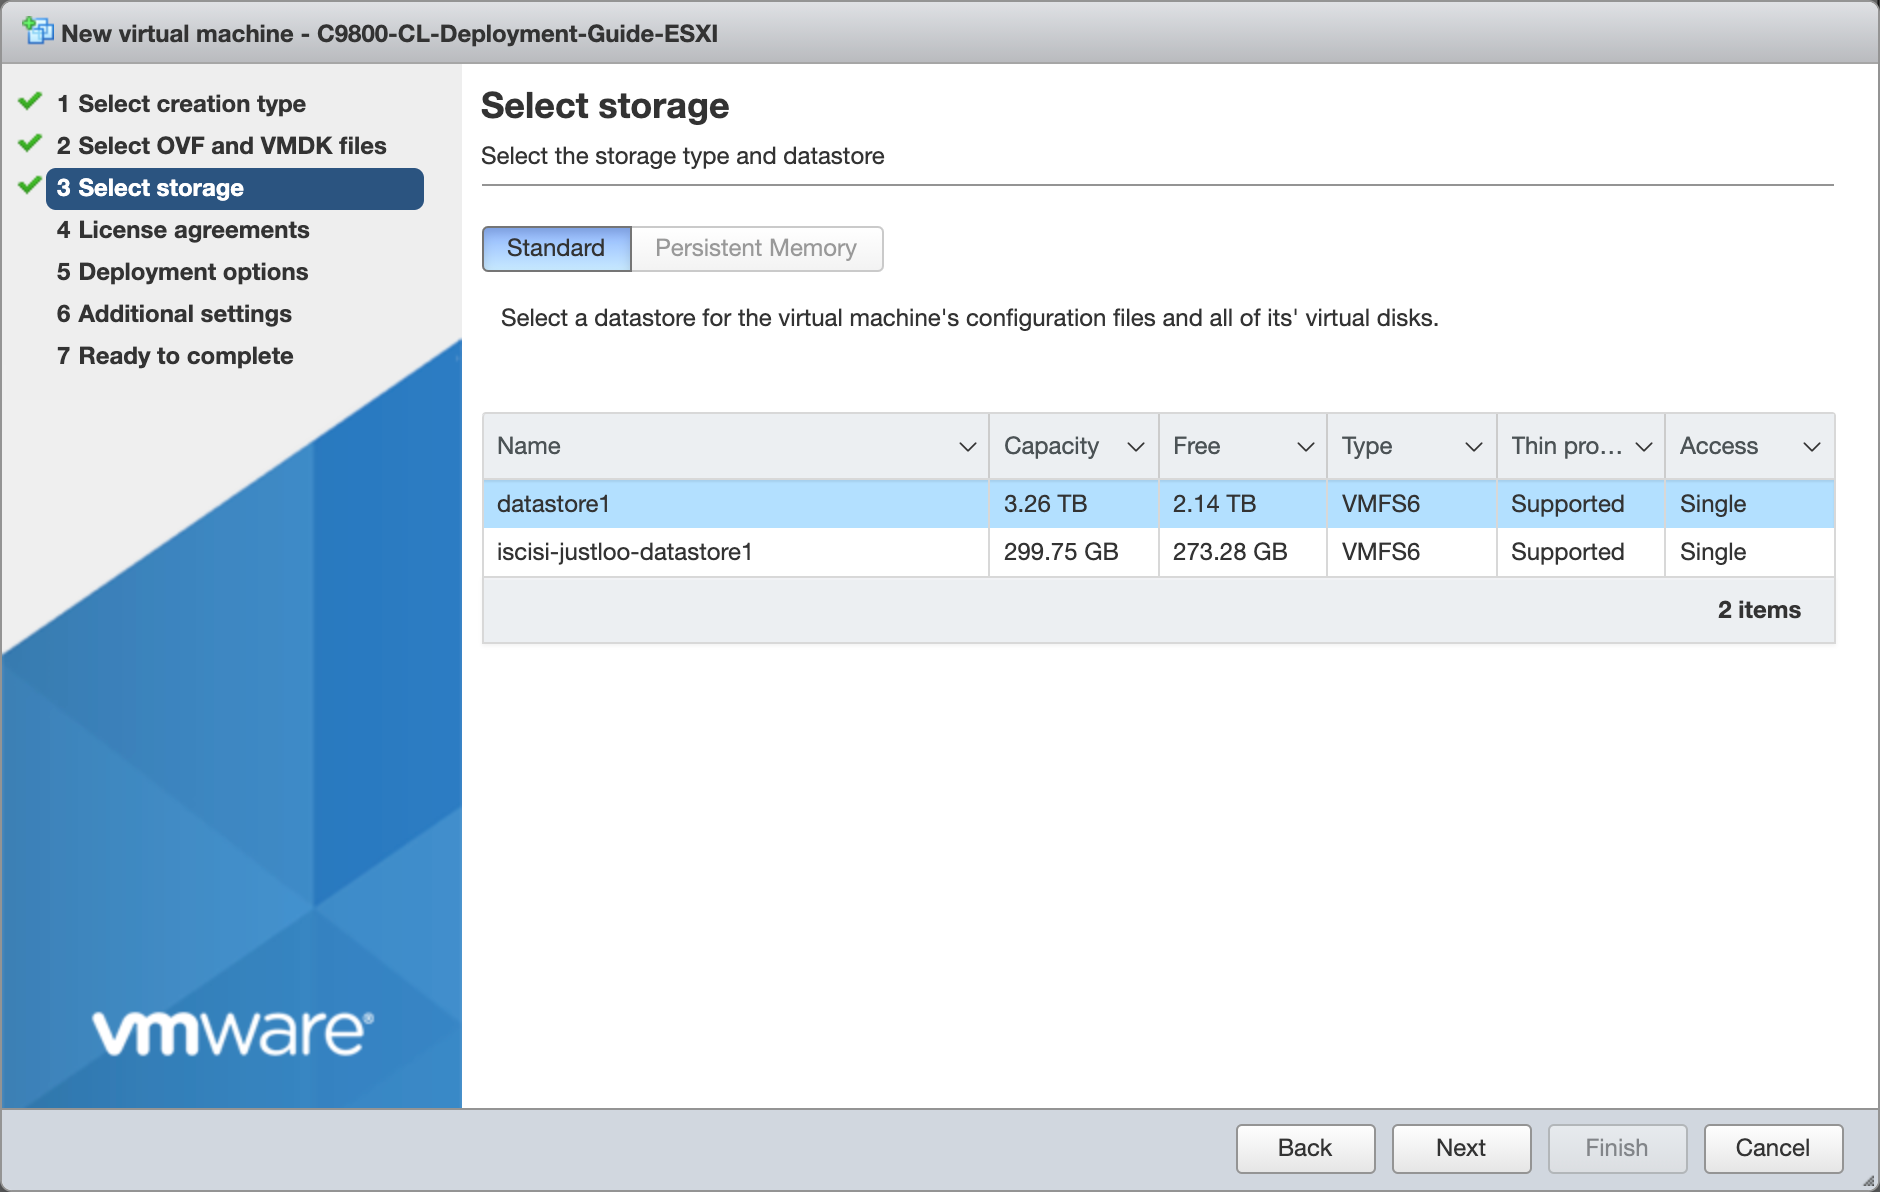 Select the datastore for the VM’s configuration files and virtual disks